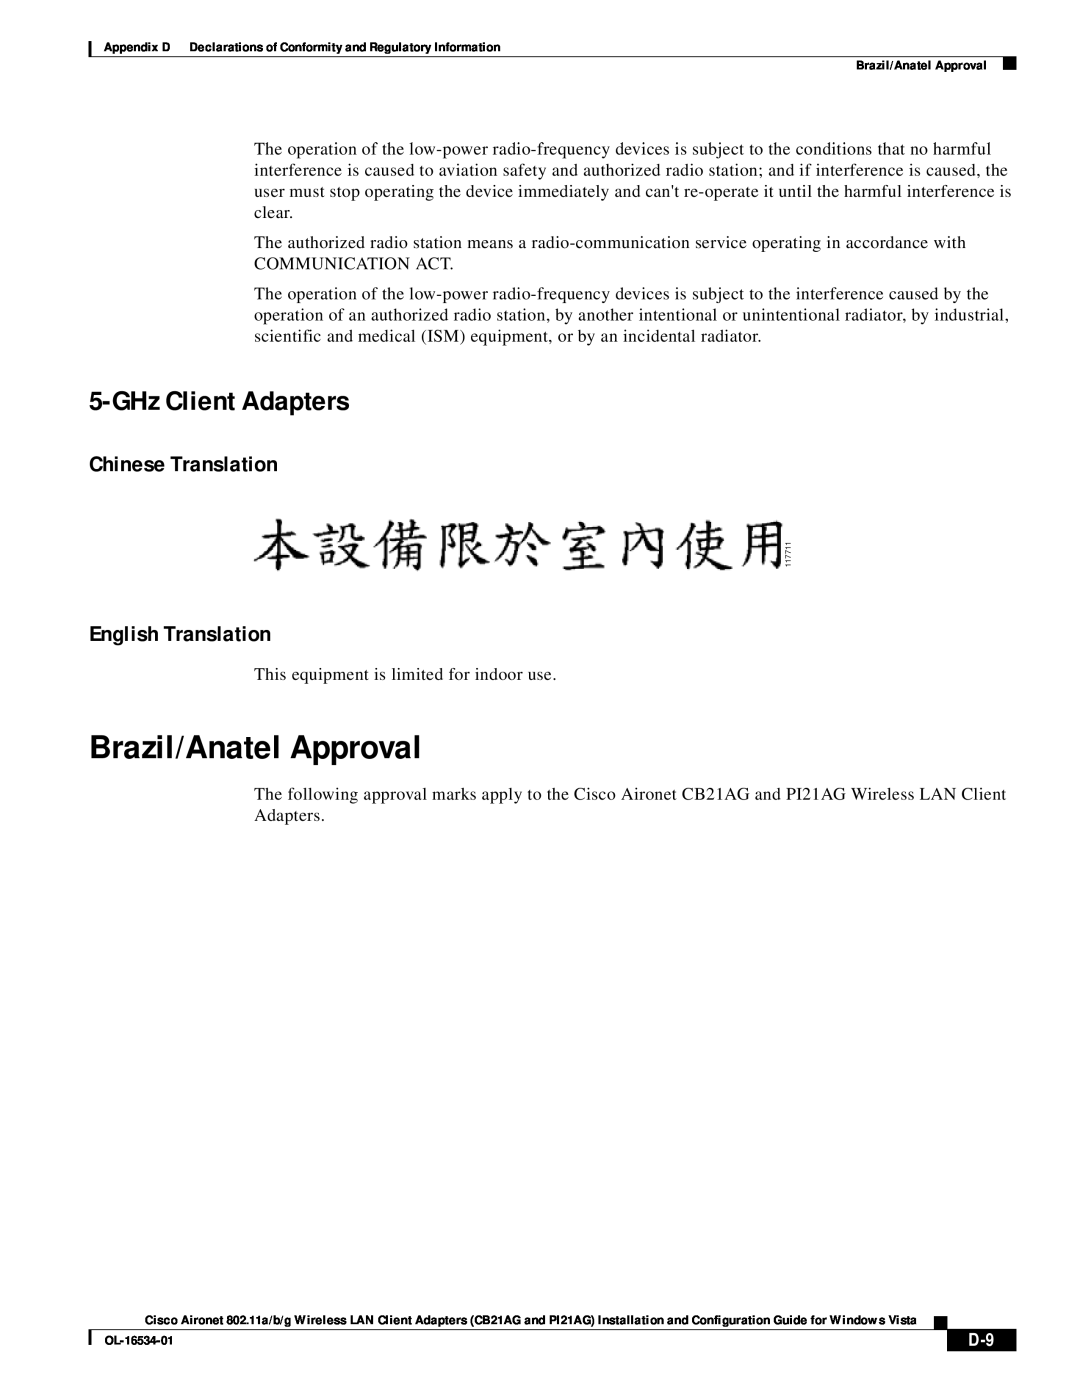 Cisco Systems CB21AG, PI21AG manual Brazil/Anatel Approval, GHz Client Adapters, Chinese Translation, English Translation 